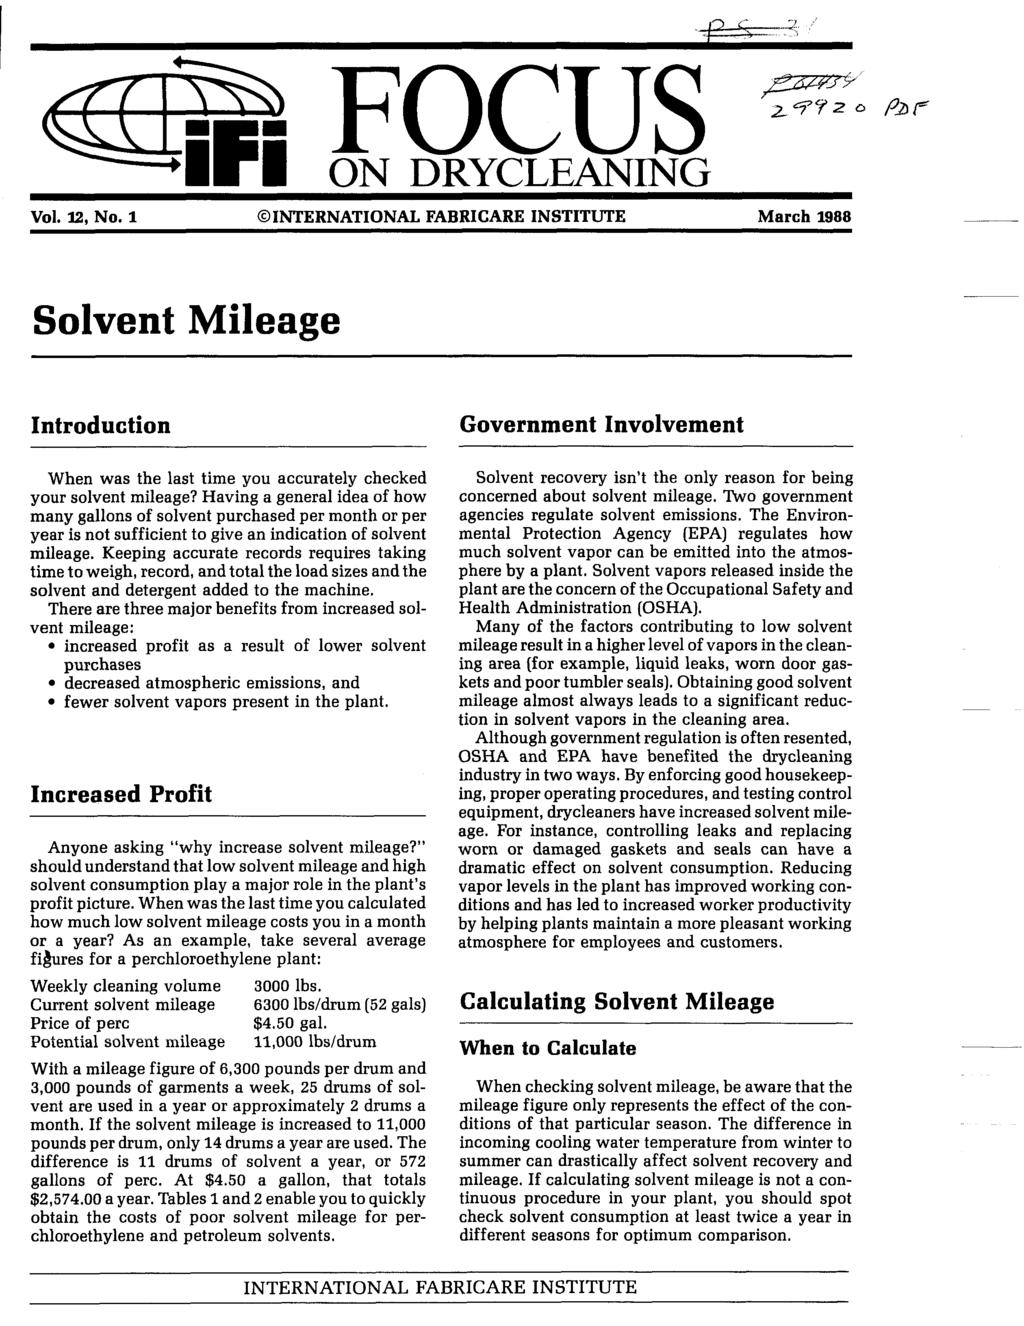 Vol. 12, No. 1 0 INTERNATIONAL FABRICARE INSTITUTE March 1988 Solvent Mileage Introduction When was the last time you accurately checked your solvent mileage?